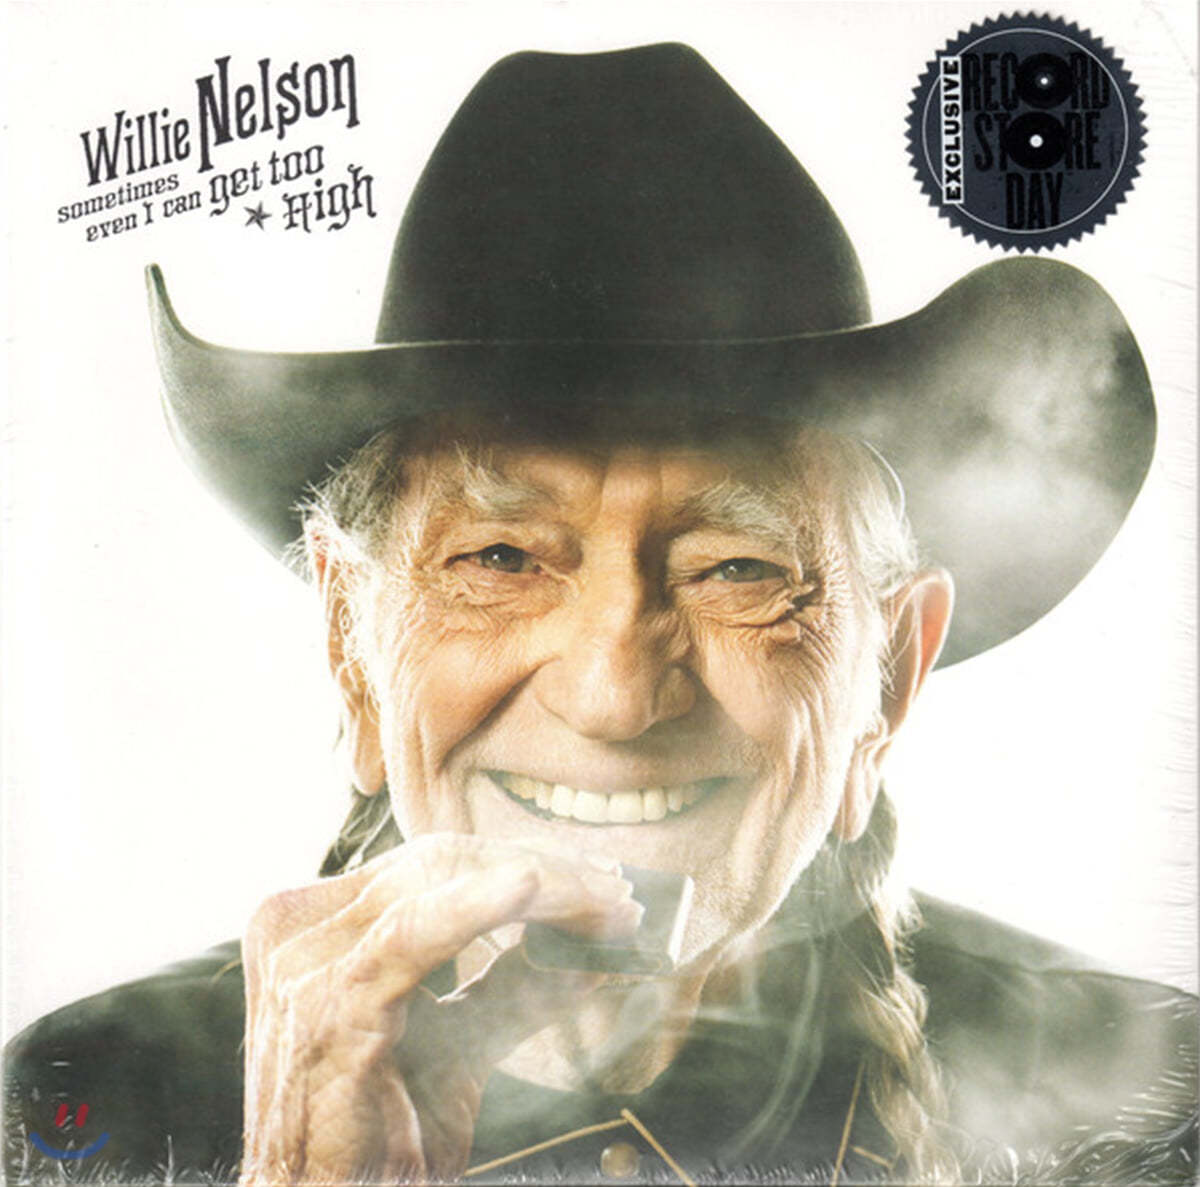 Willie Nelson (윌리 넬슨) - Sometimes Even I Can Get Too High [7인치 싱글 Vinyl]